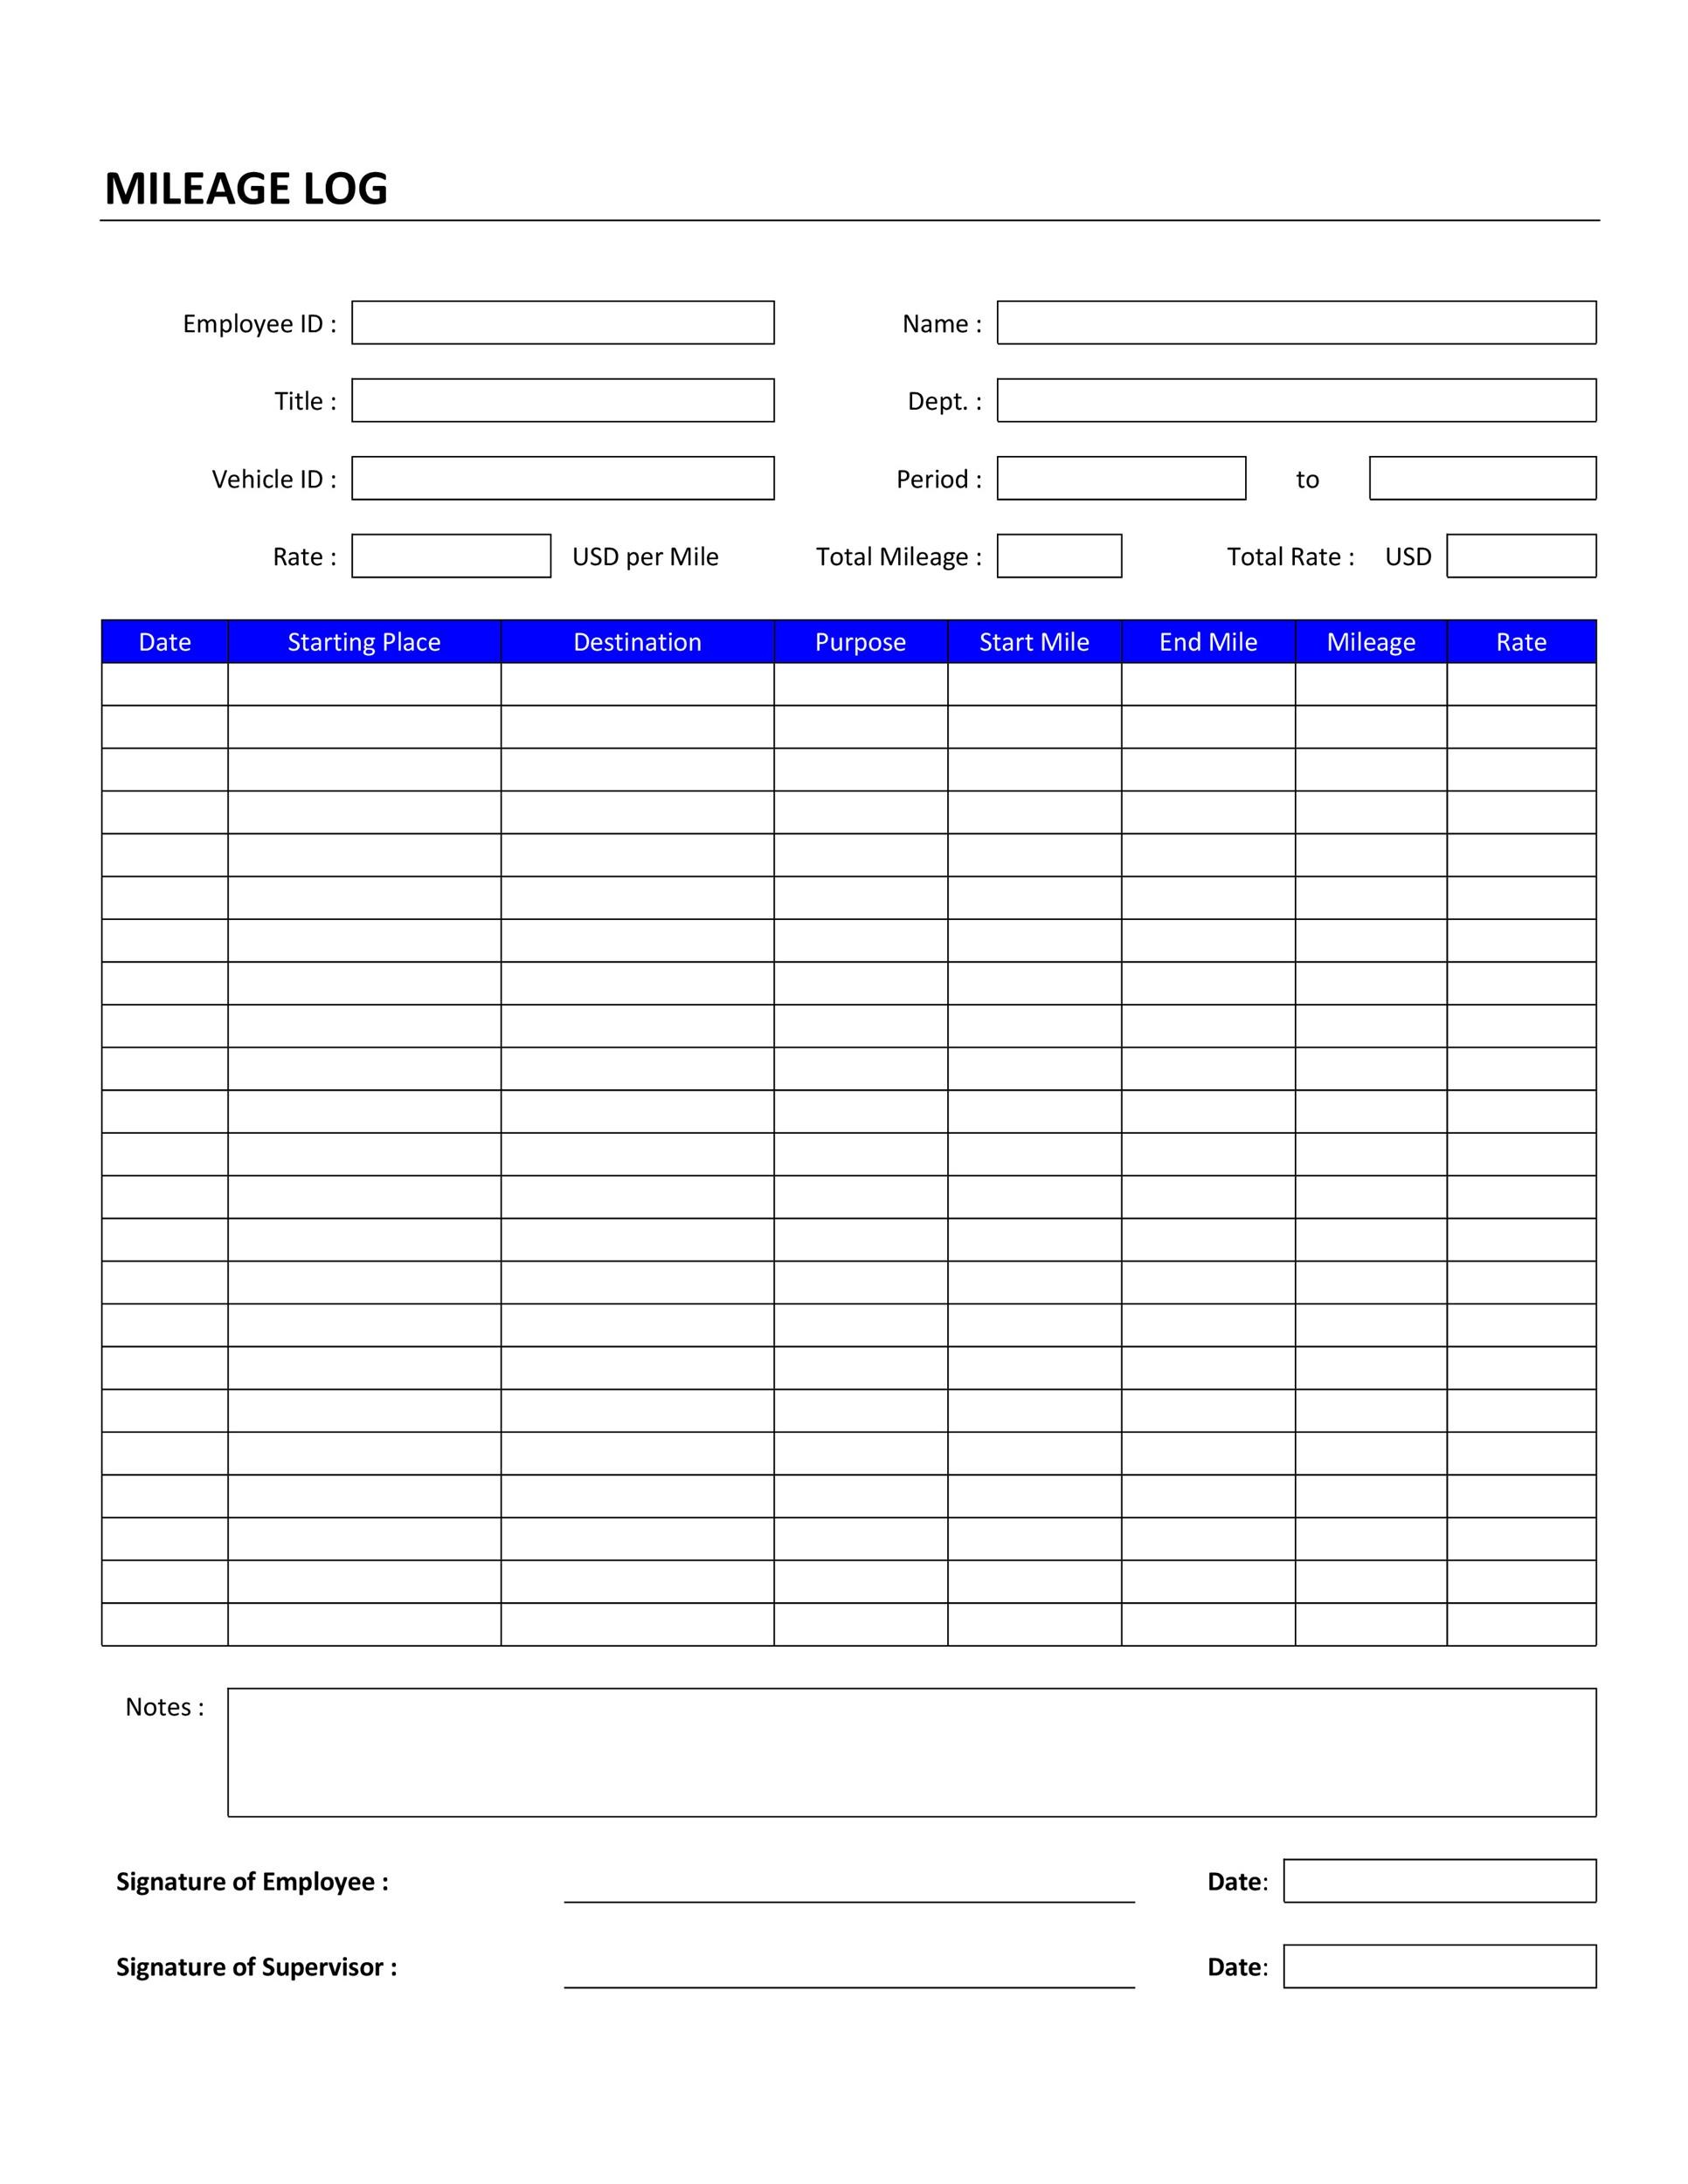 printable-mileage-log-26-examples-format-pdf-examples